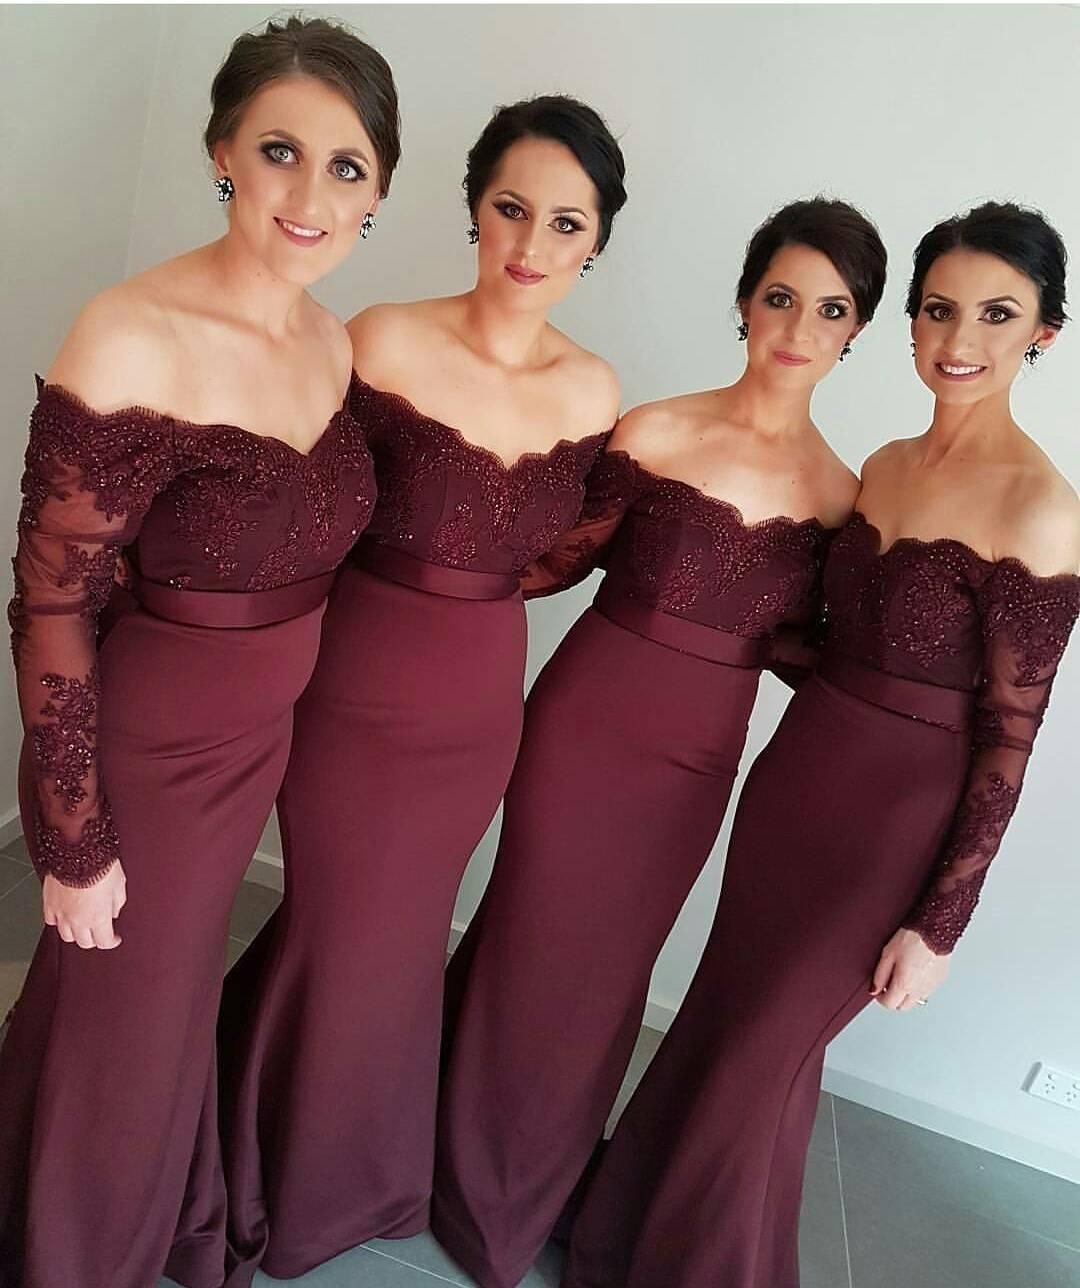 Cheap Burgundy Grape Mermaid Bridesmaid Dresses Off Shoulder Lace Appliques Long Sleeves Custom Floor Length For Wedding Maid of Honor Gowns